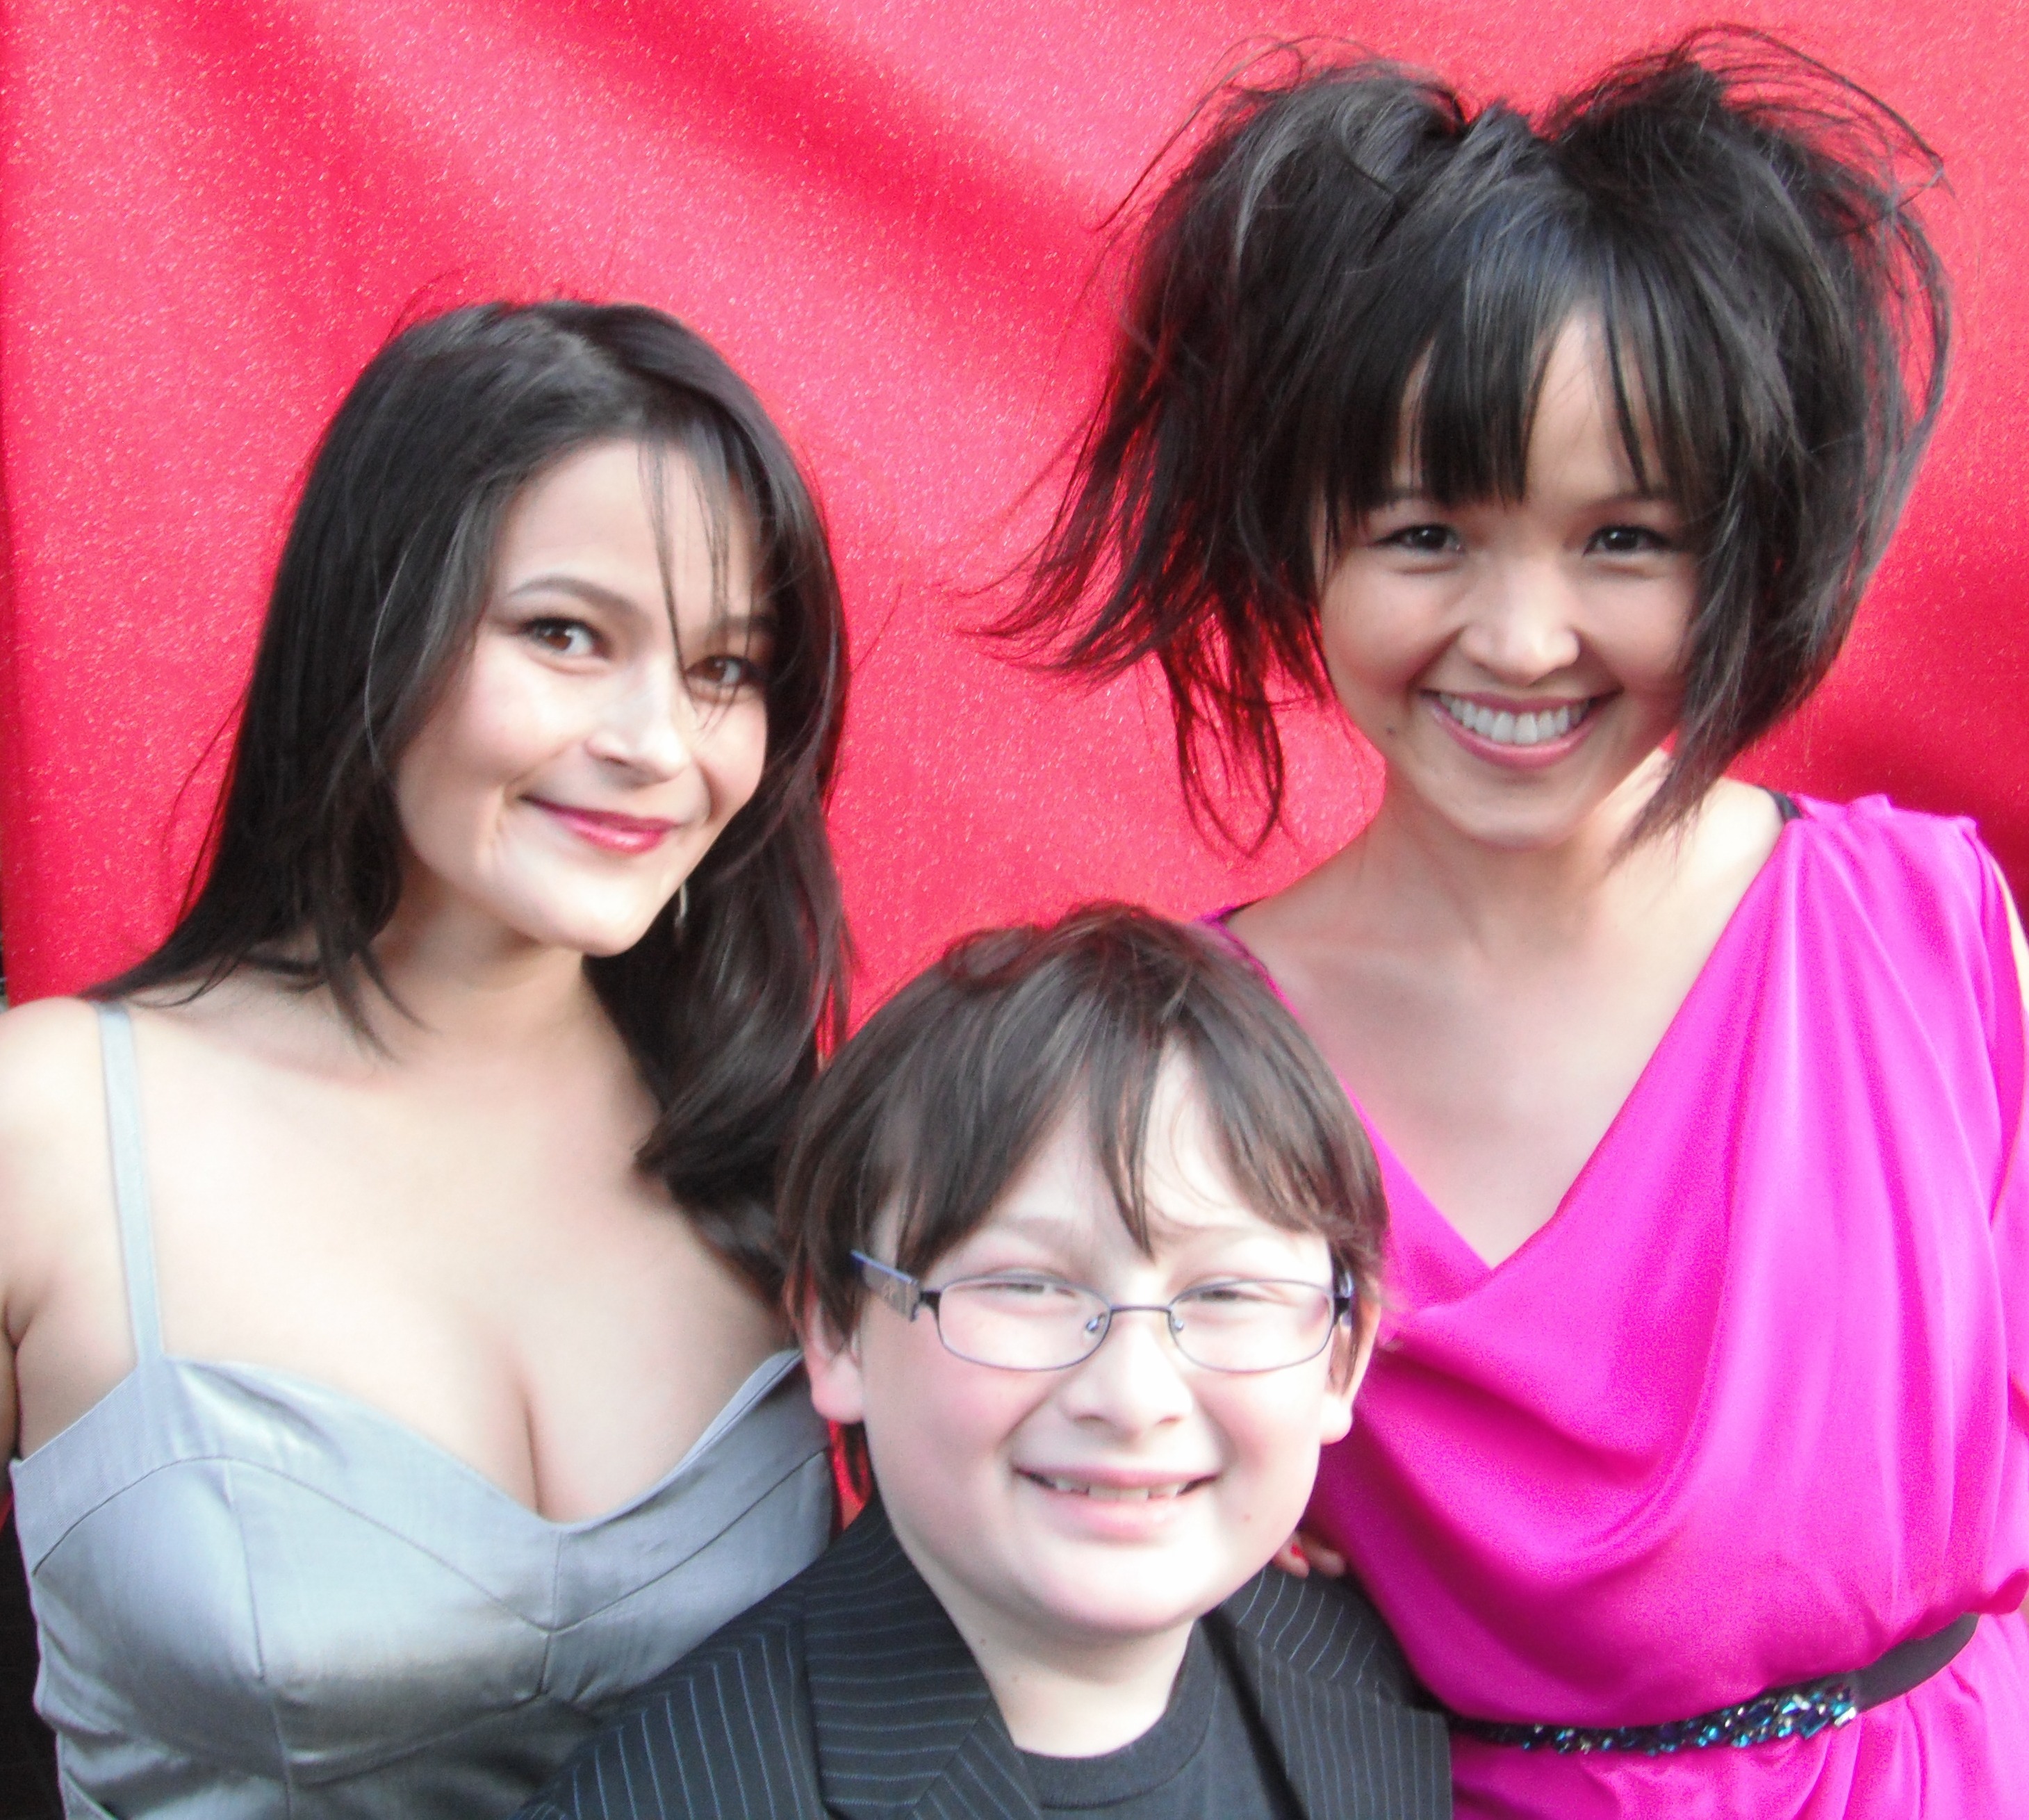 Matthew Jacob Wayne with Romi Danes (L) and Tania Gunadi (R) at the Miss Teen Asia USA celebration party, in 2011, for Matthew's God Sister: Miss Teen Asia USA: Meeghan Henry.